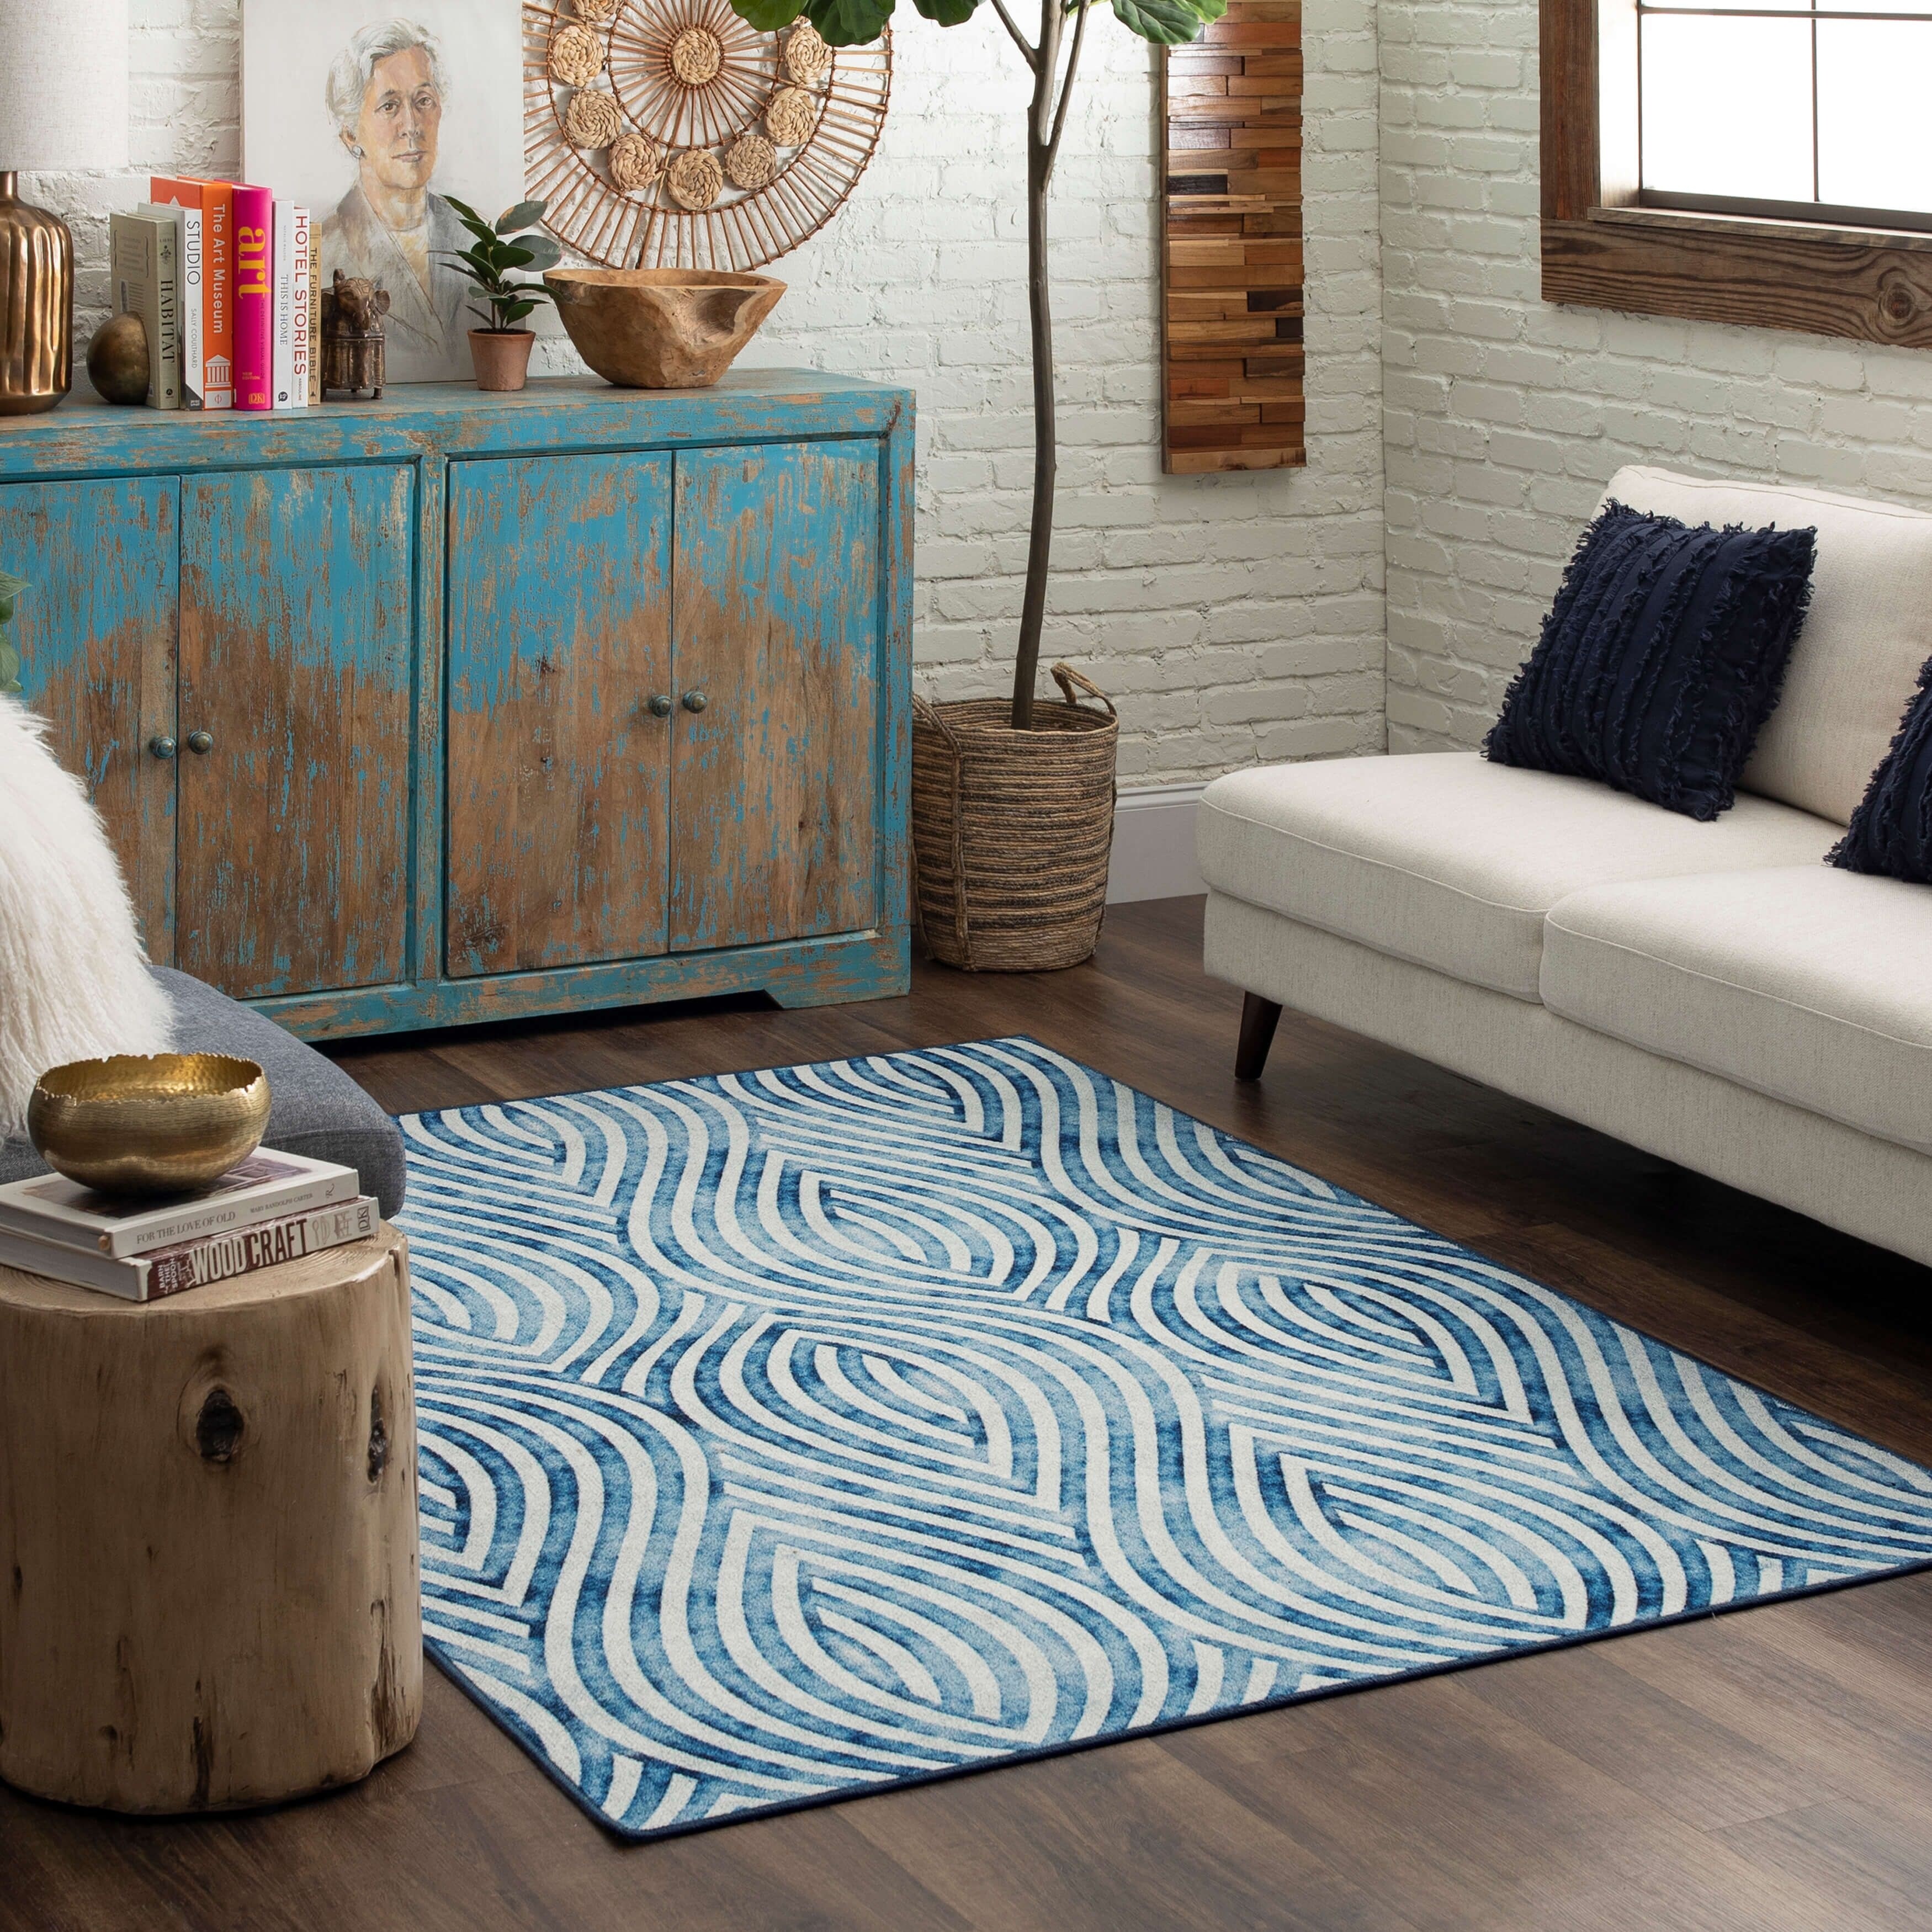 https://ak1.ostkcdn.com/images/products/is/images/direct/994839715343a039ef73a5caba2f4f34fa84be7e/Mohawk-Home-Gordan-Blue-Area-Rug.jpg